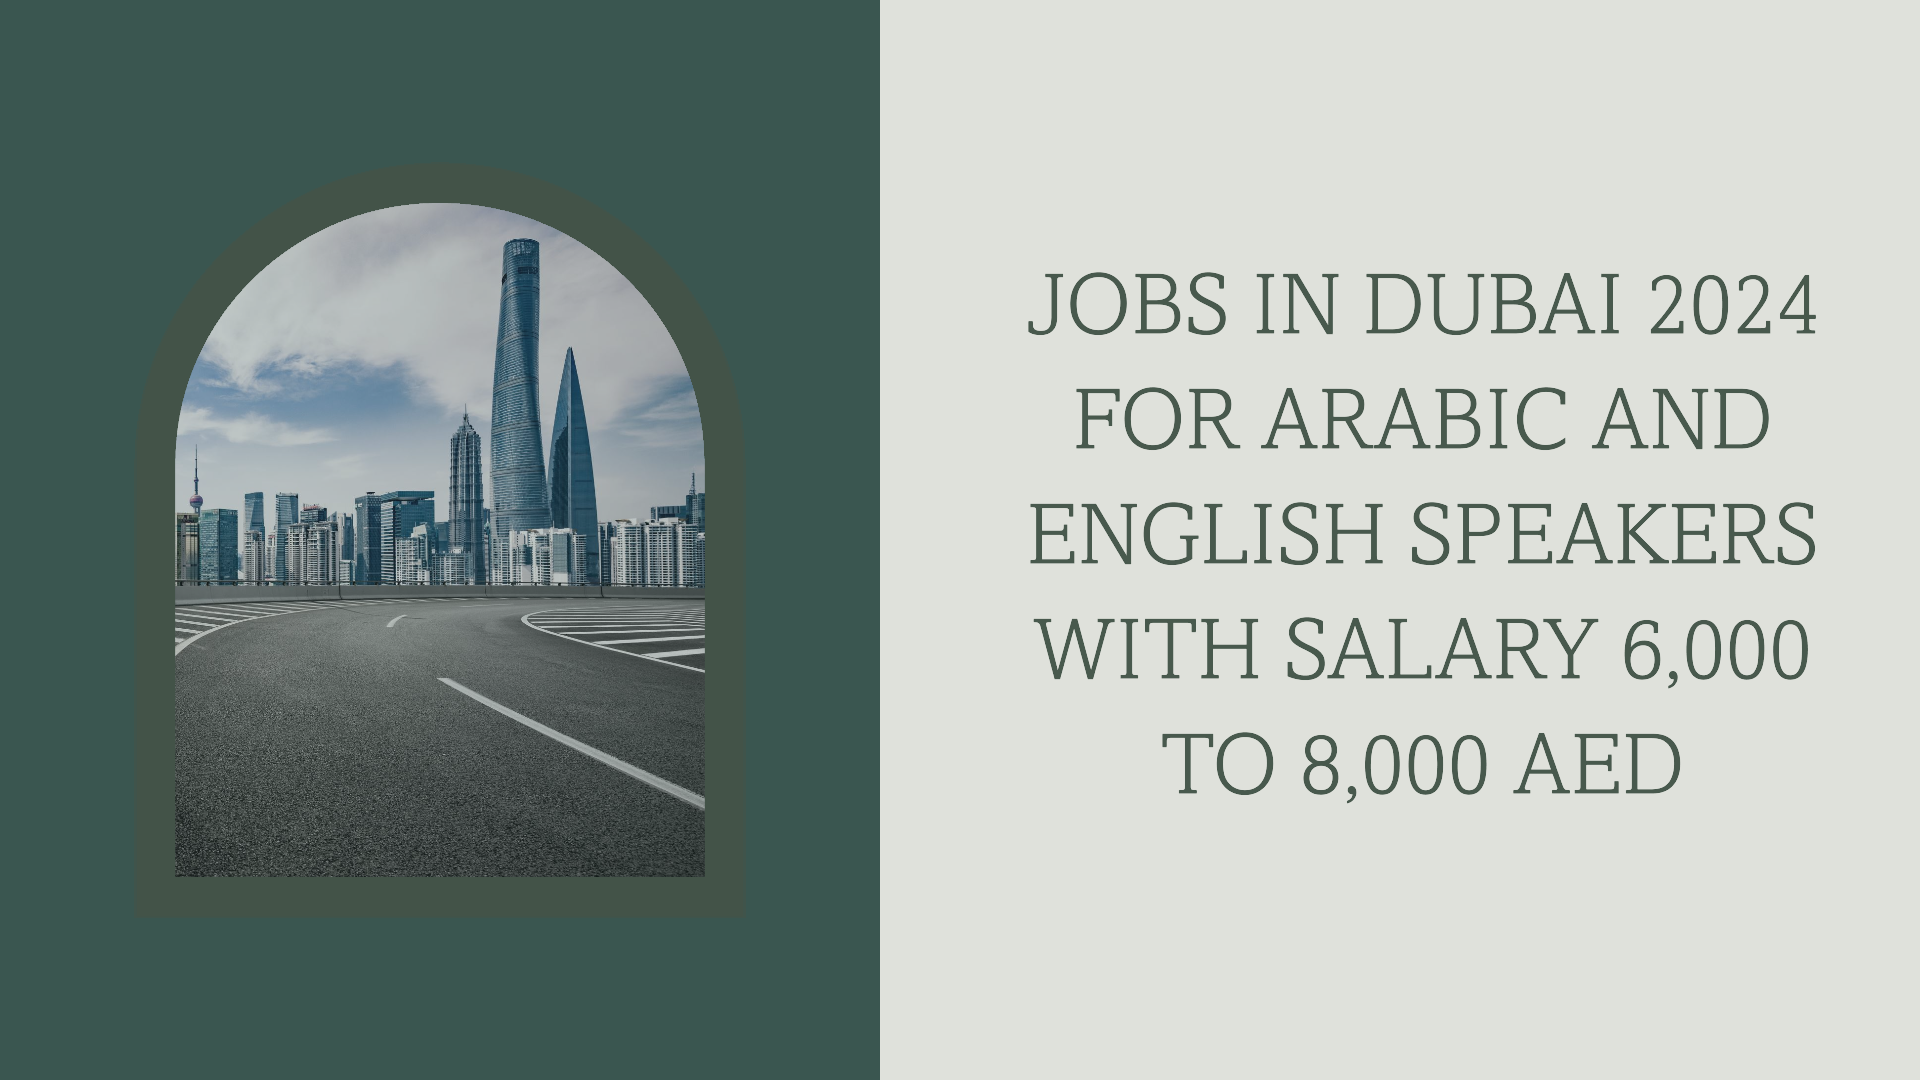 jobs in dubai 2024 for arabic and english speakers with salary 6,000 to 8,000 AED